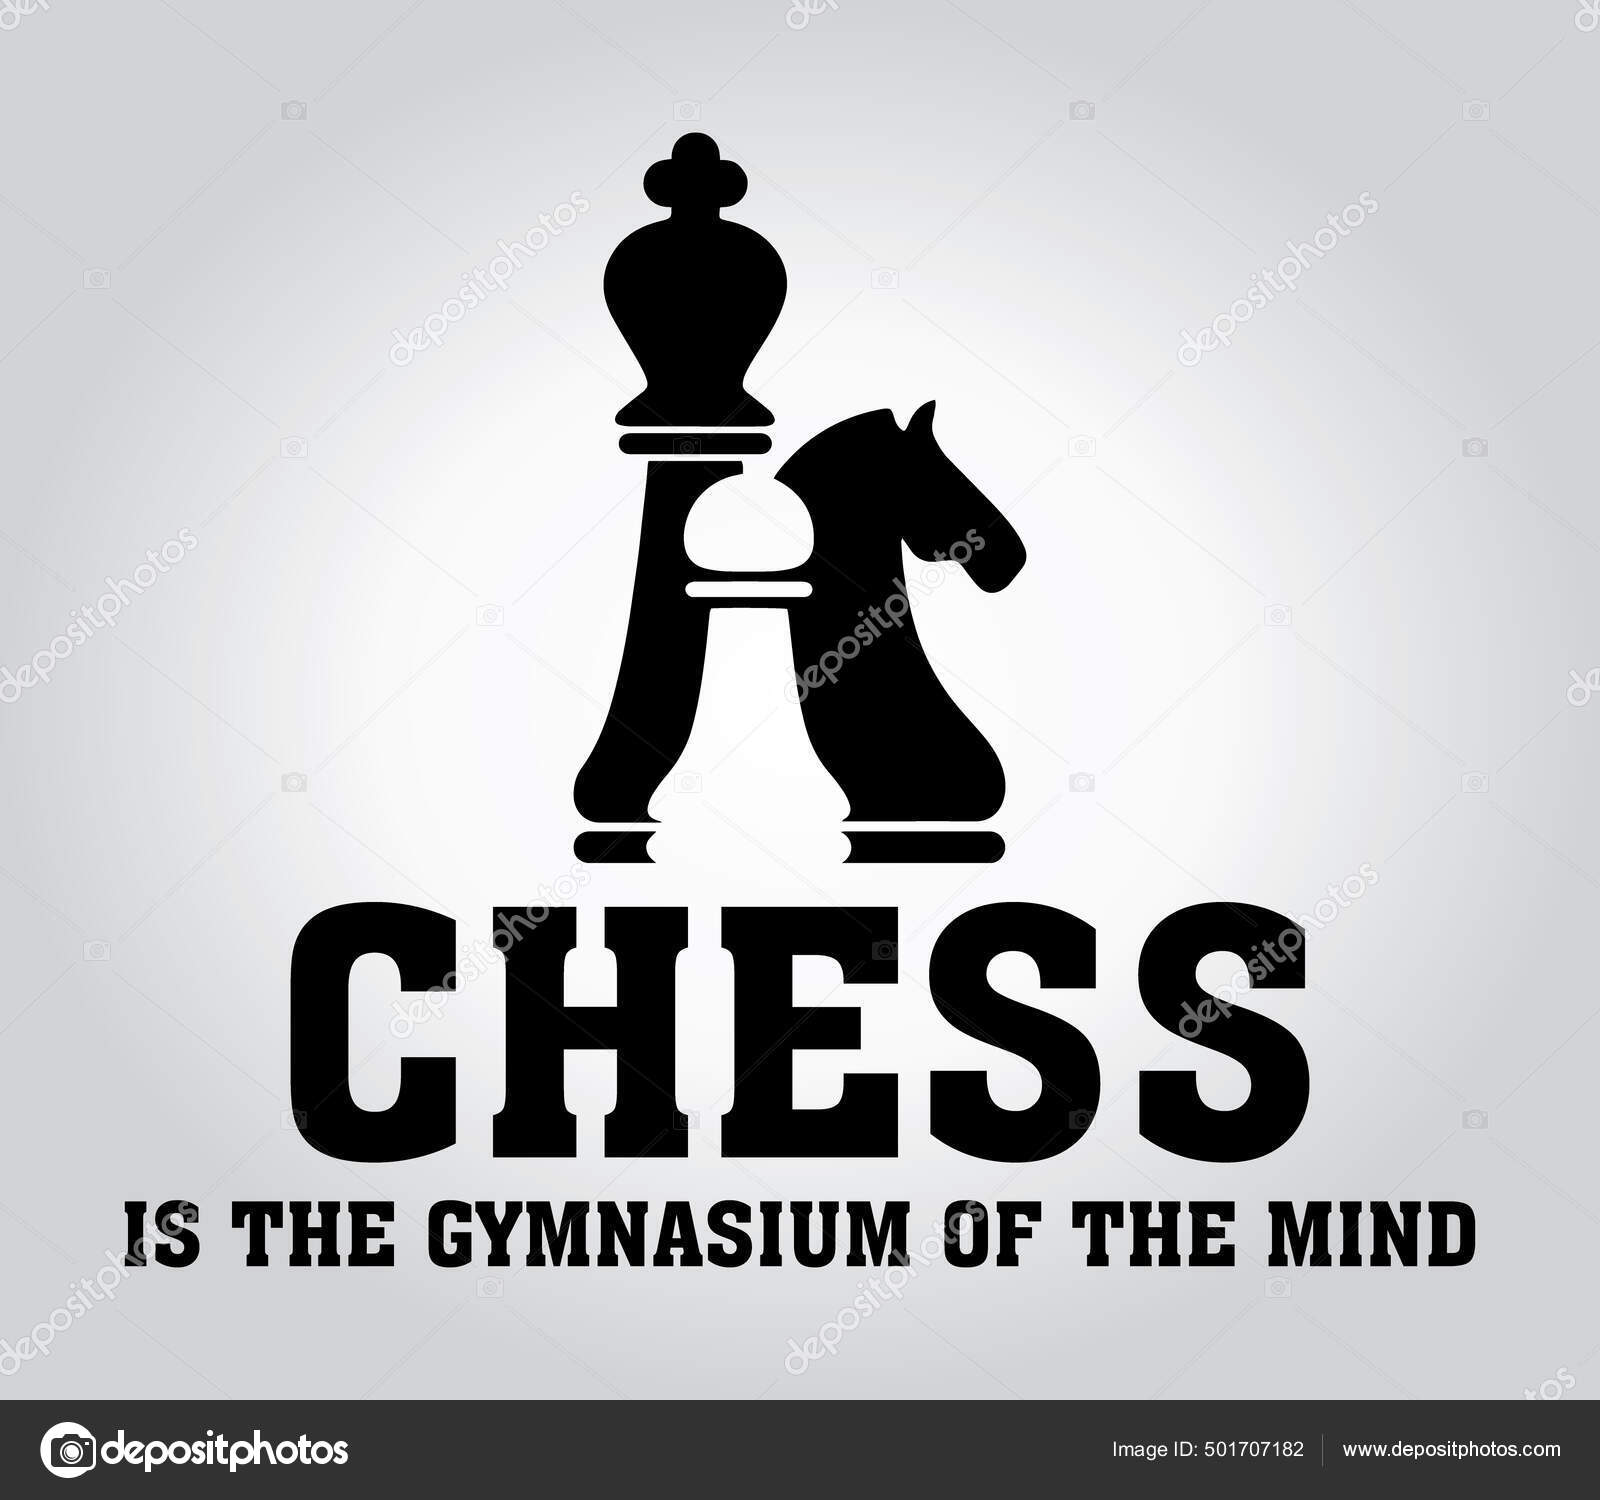 Italian Game Downloadable Chess Print Chess Opening Poster 